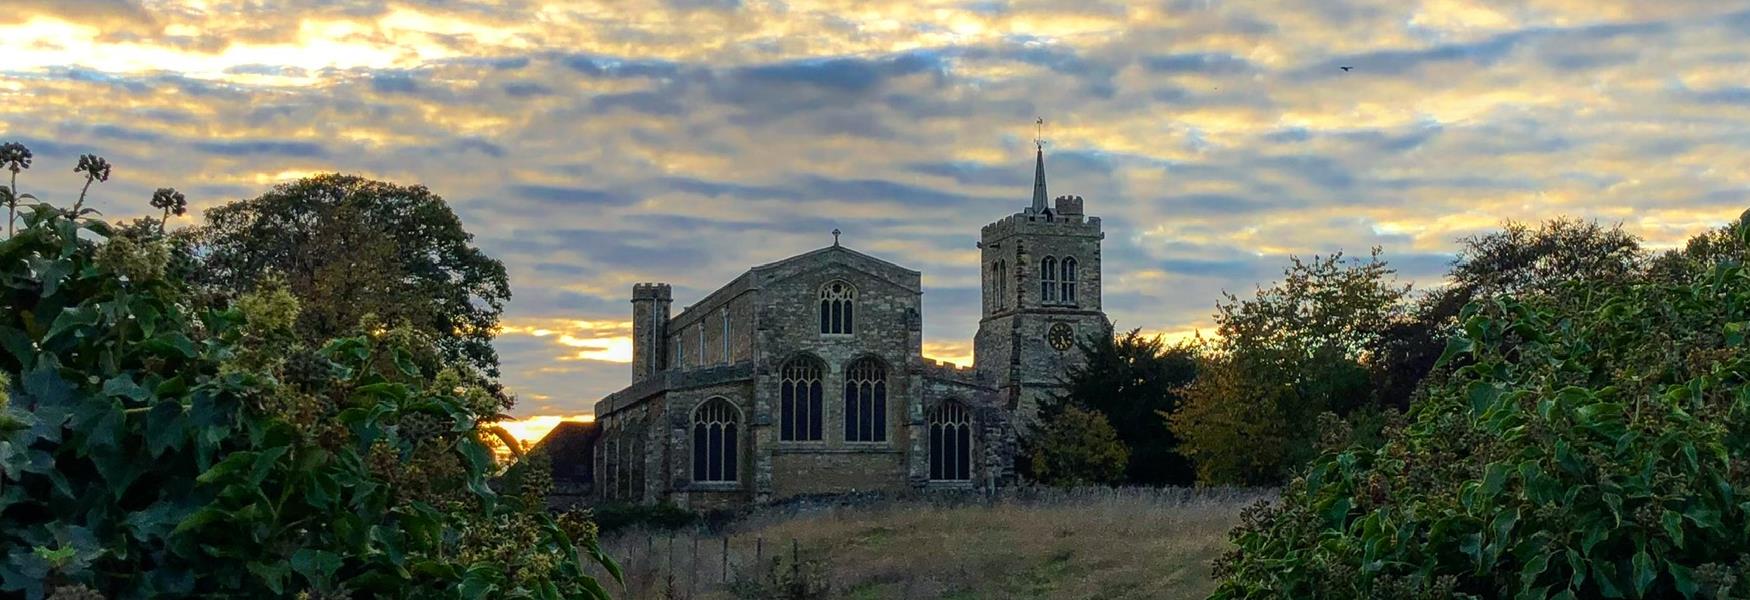 Elstow Abbey, photo by Shaun Jacques